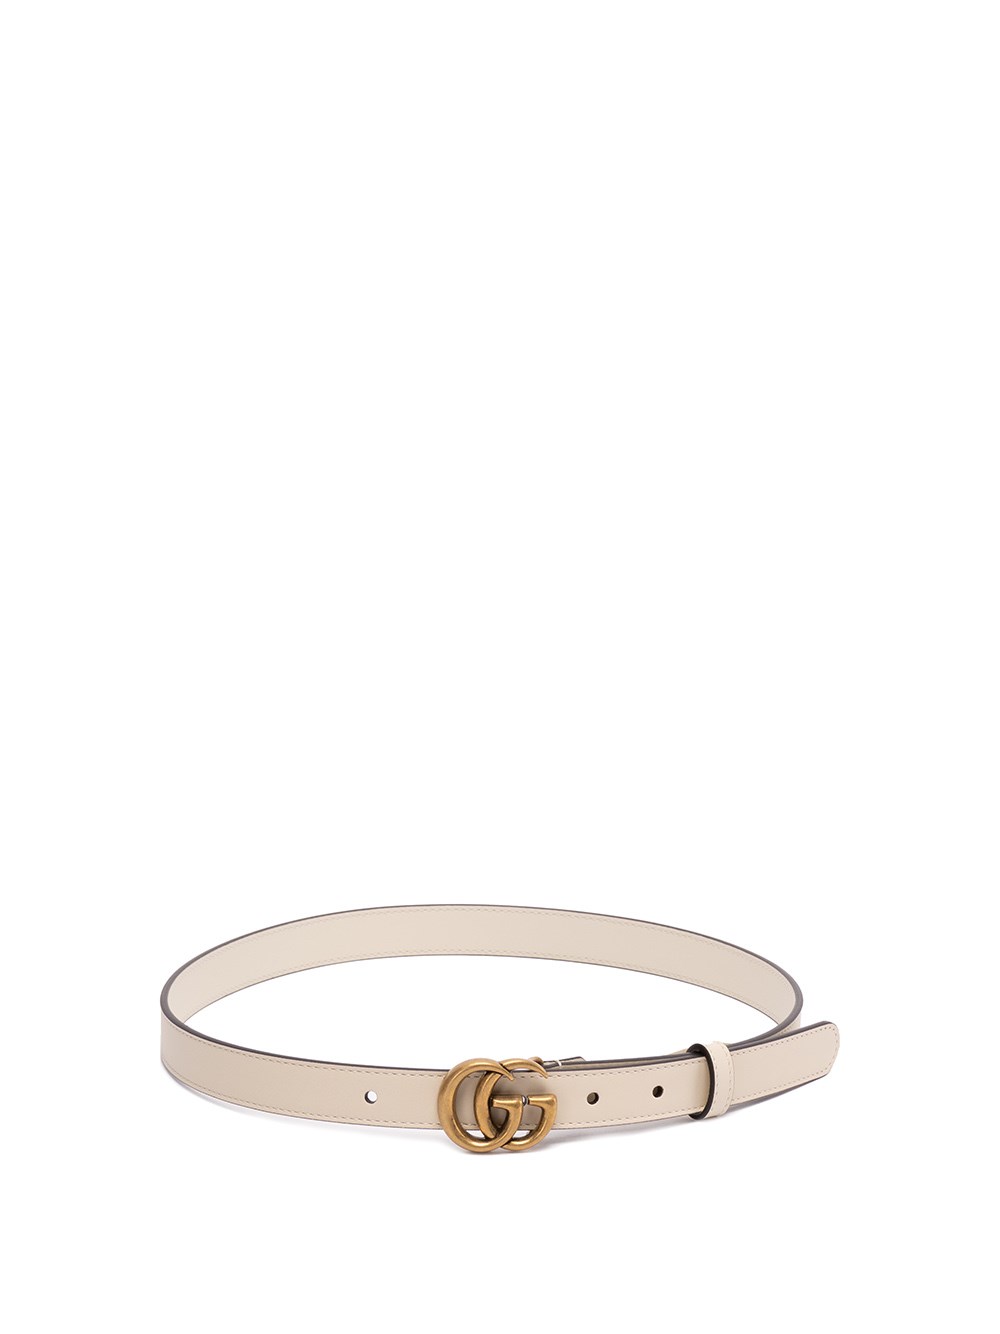 GUCCI THIN BELT WITH DOUBLE G BUCKLE